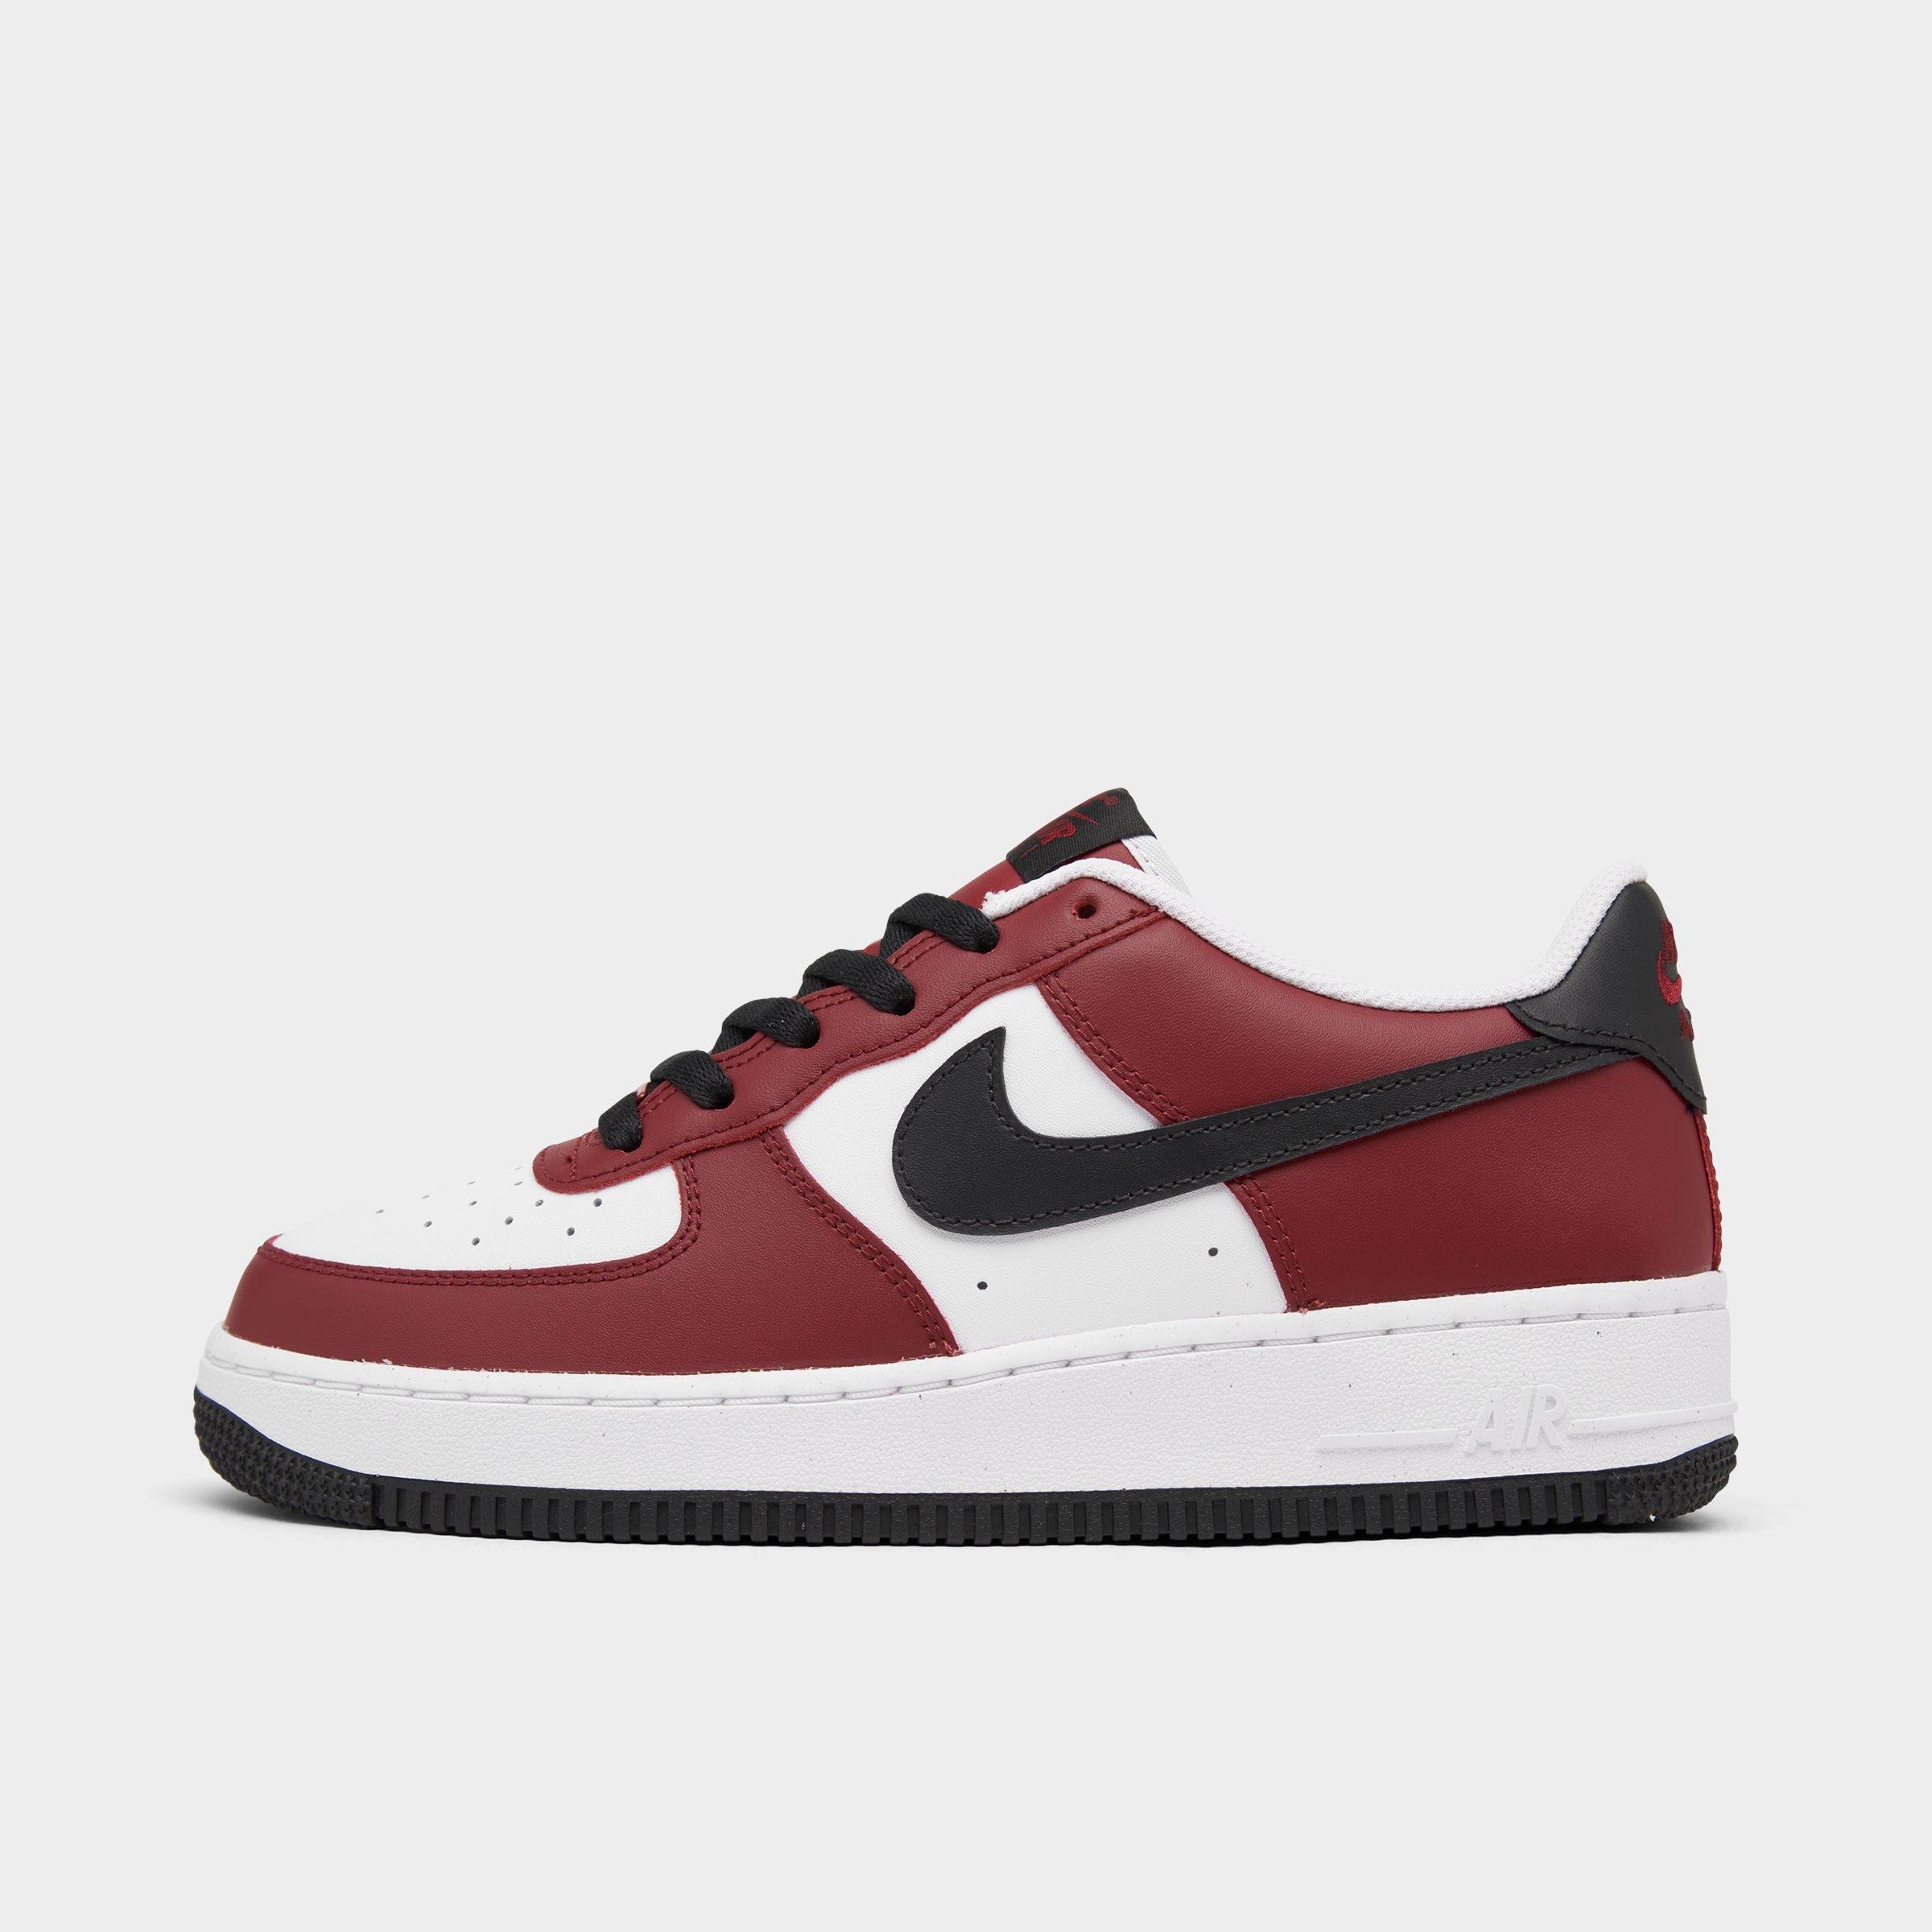 view more detail nike air force 1 lv8